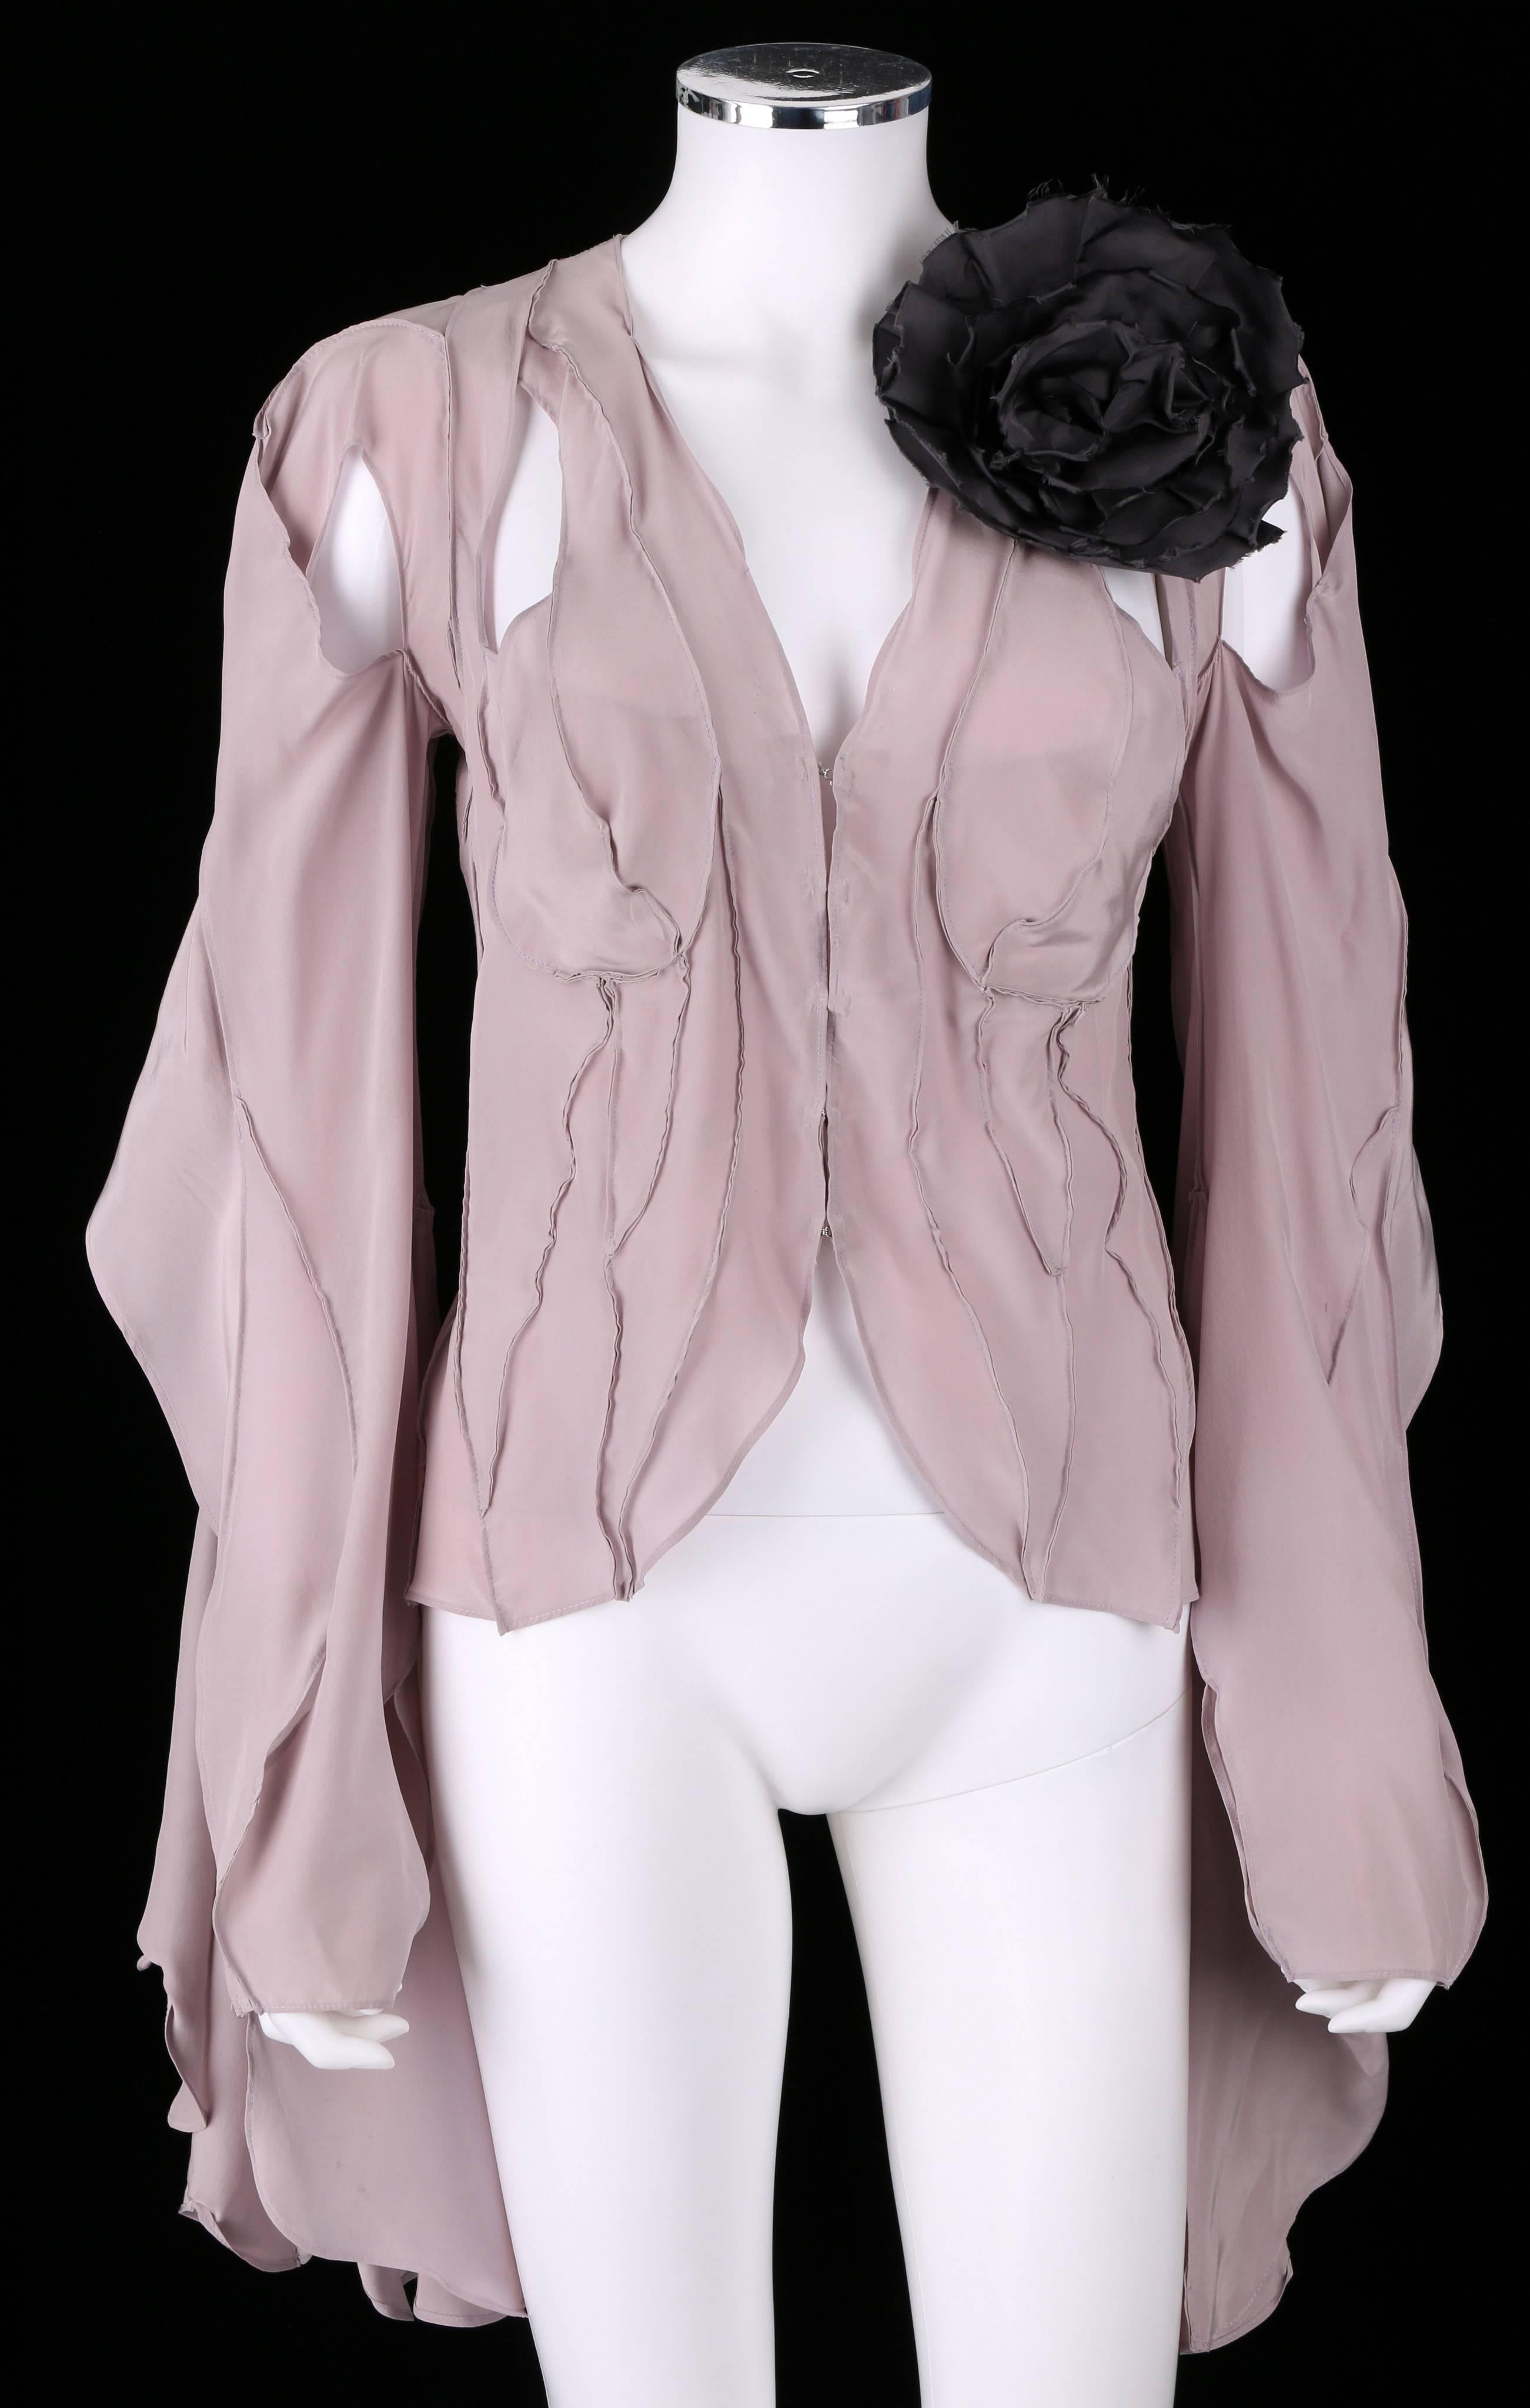 Yves Saint Laurent Spring/Summer 2003 by Tom Ford lavender silk layered deconstructed blouse. Long flowing sleeves have cutouts/open sections and button at cuff. Blouse closes at front with hooks and eyes. Large black flower brooch. Marked Fabric